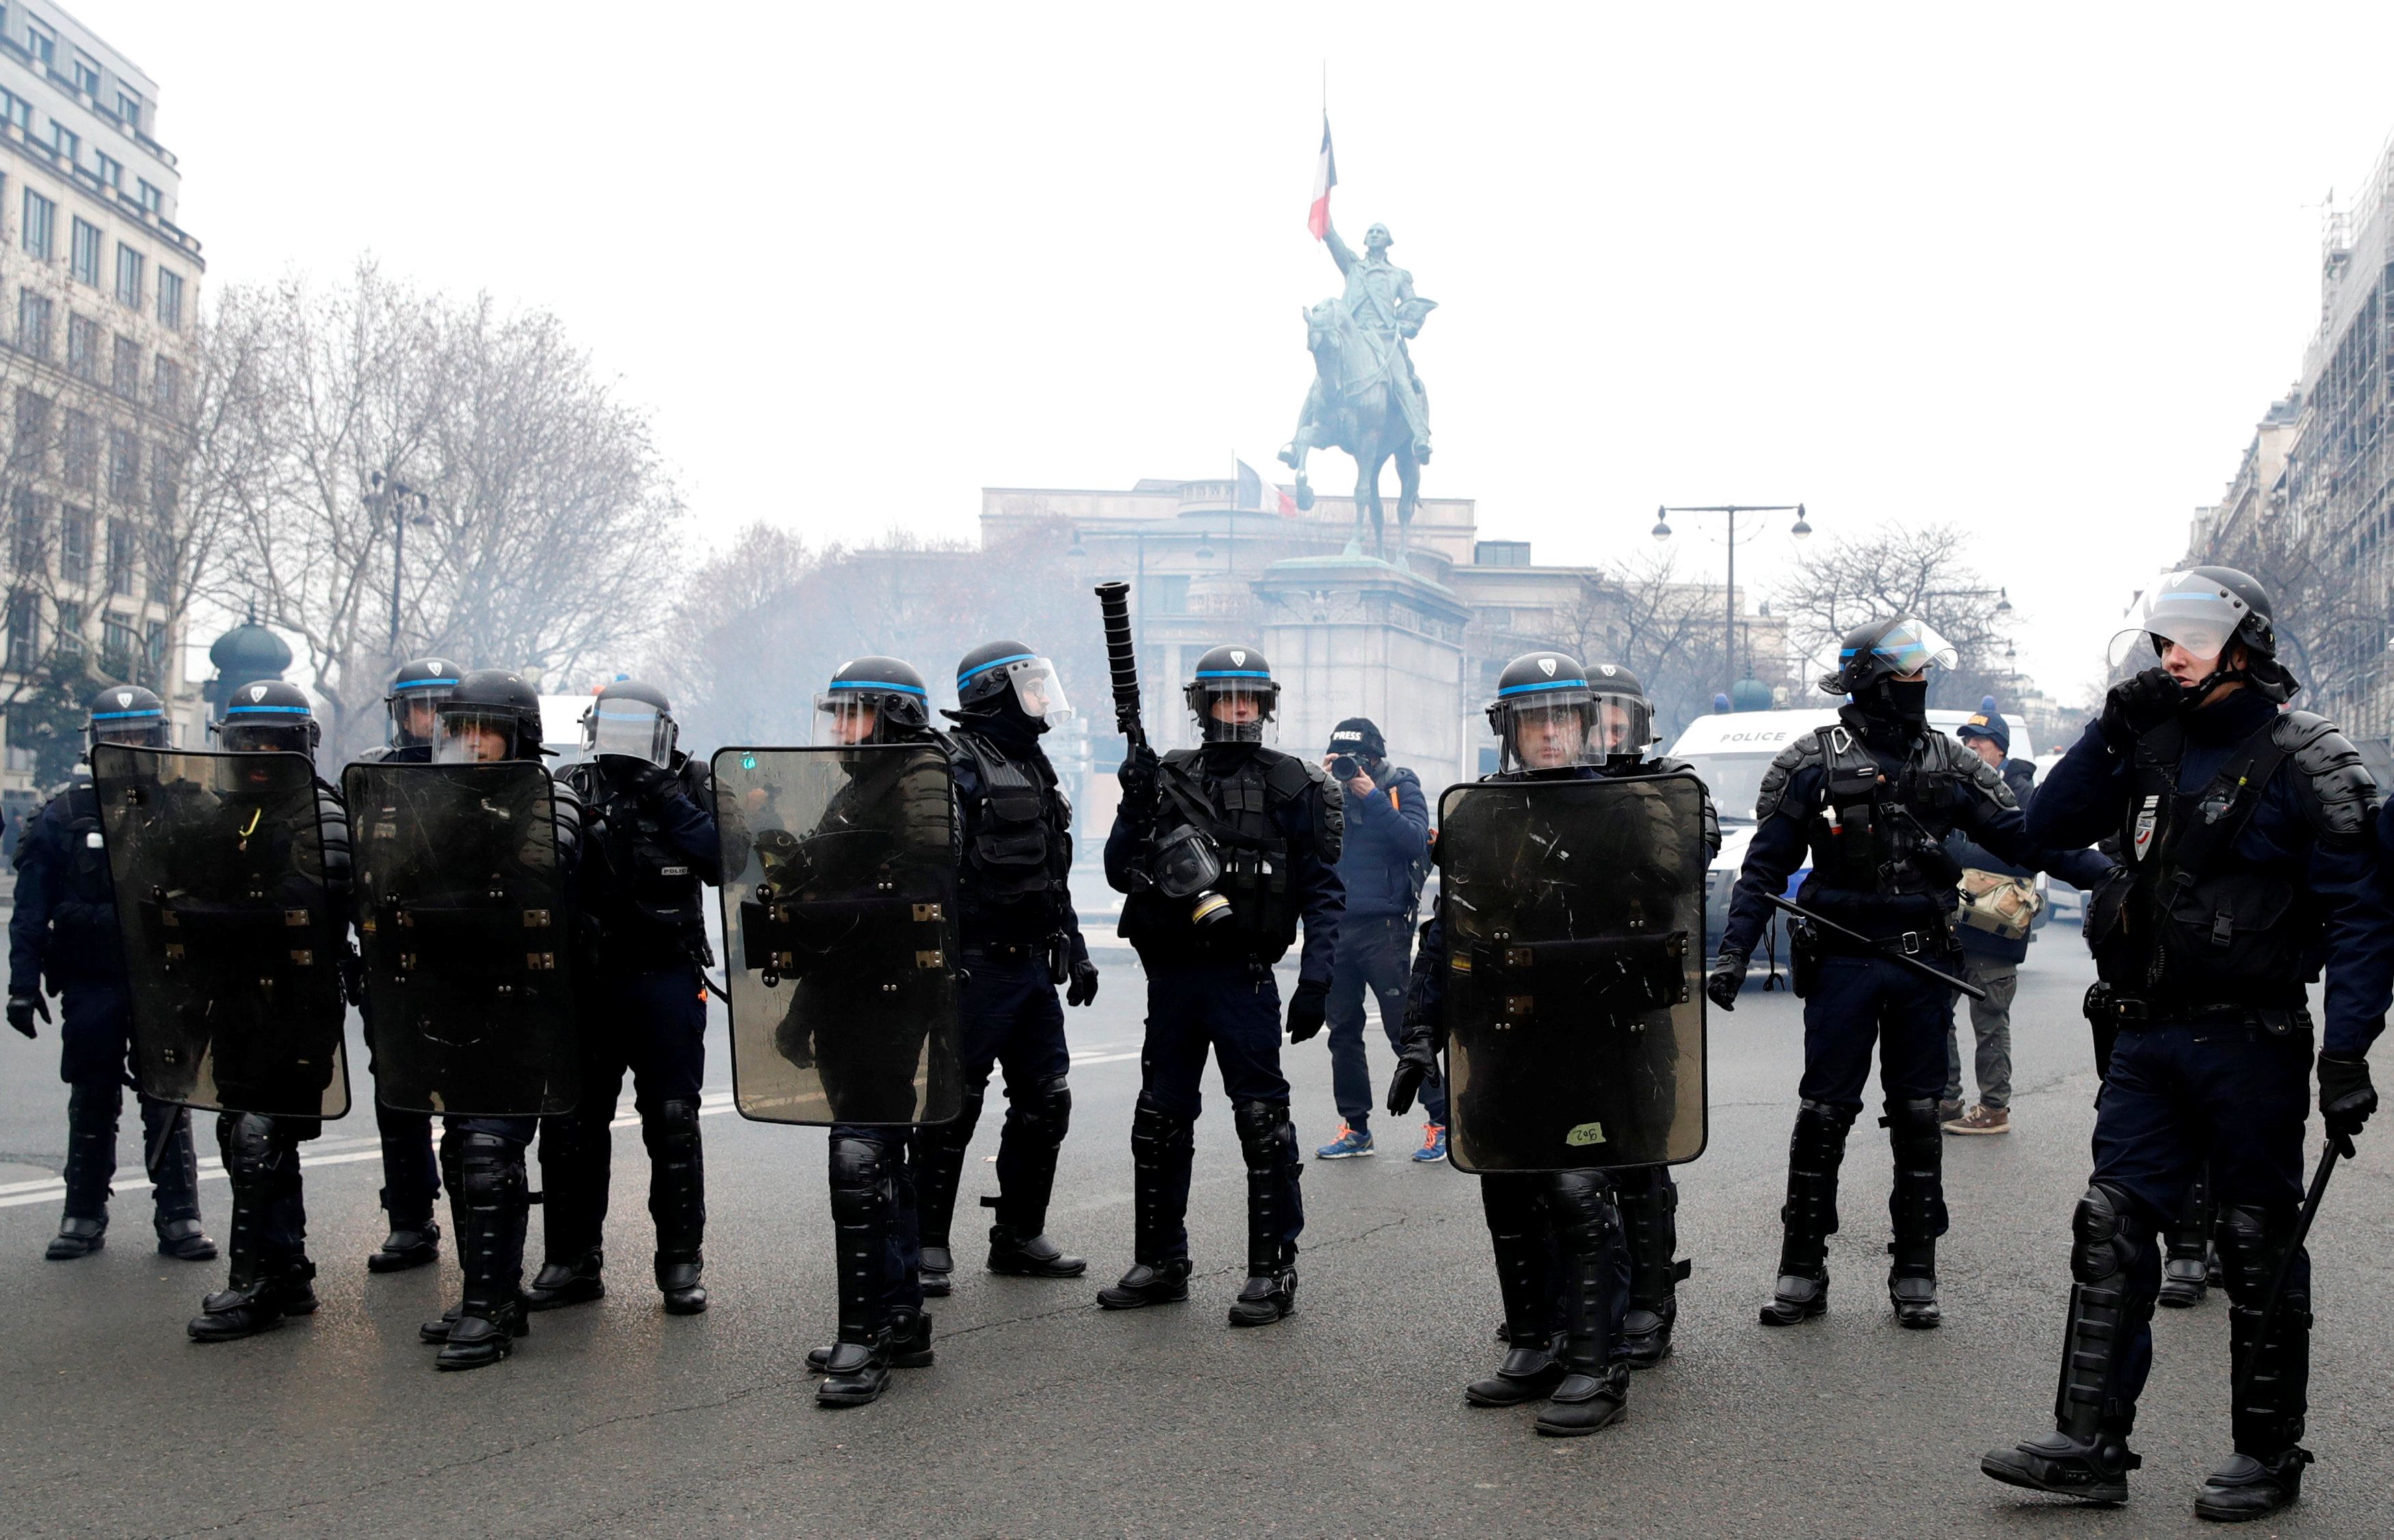 2018-12-15T104726Z_1457875417_RC1D60FE93E0_RTRMADP_3_FRANCE-PROTESTS